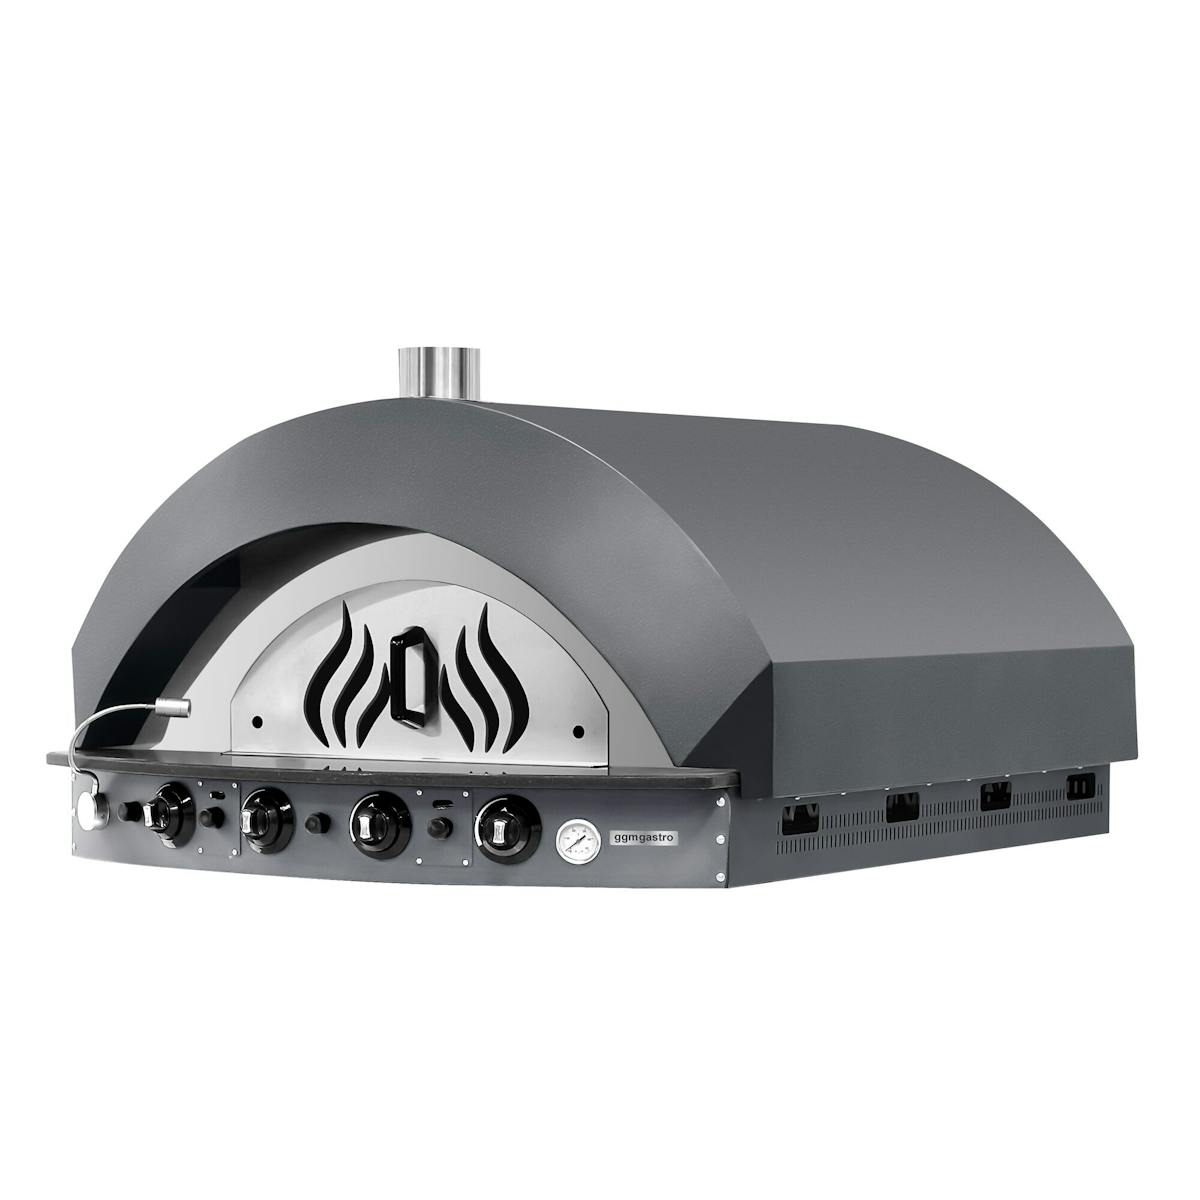 Gas pizza oven - Anthracite - 11x 25cm - Manual